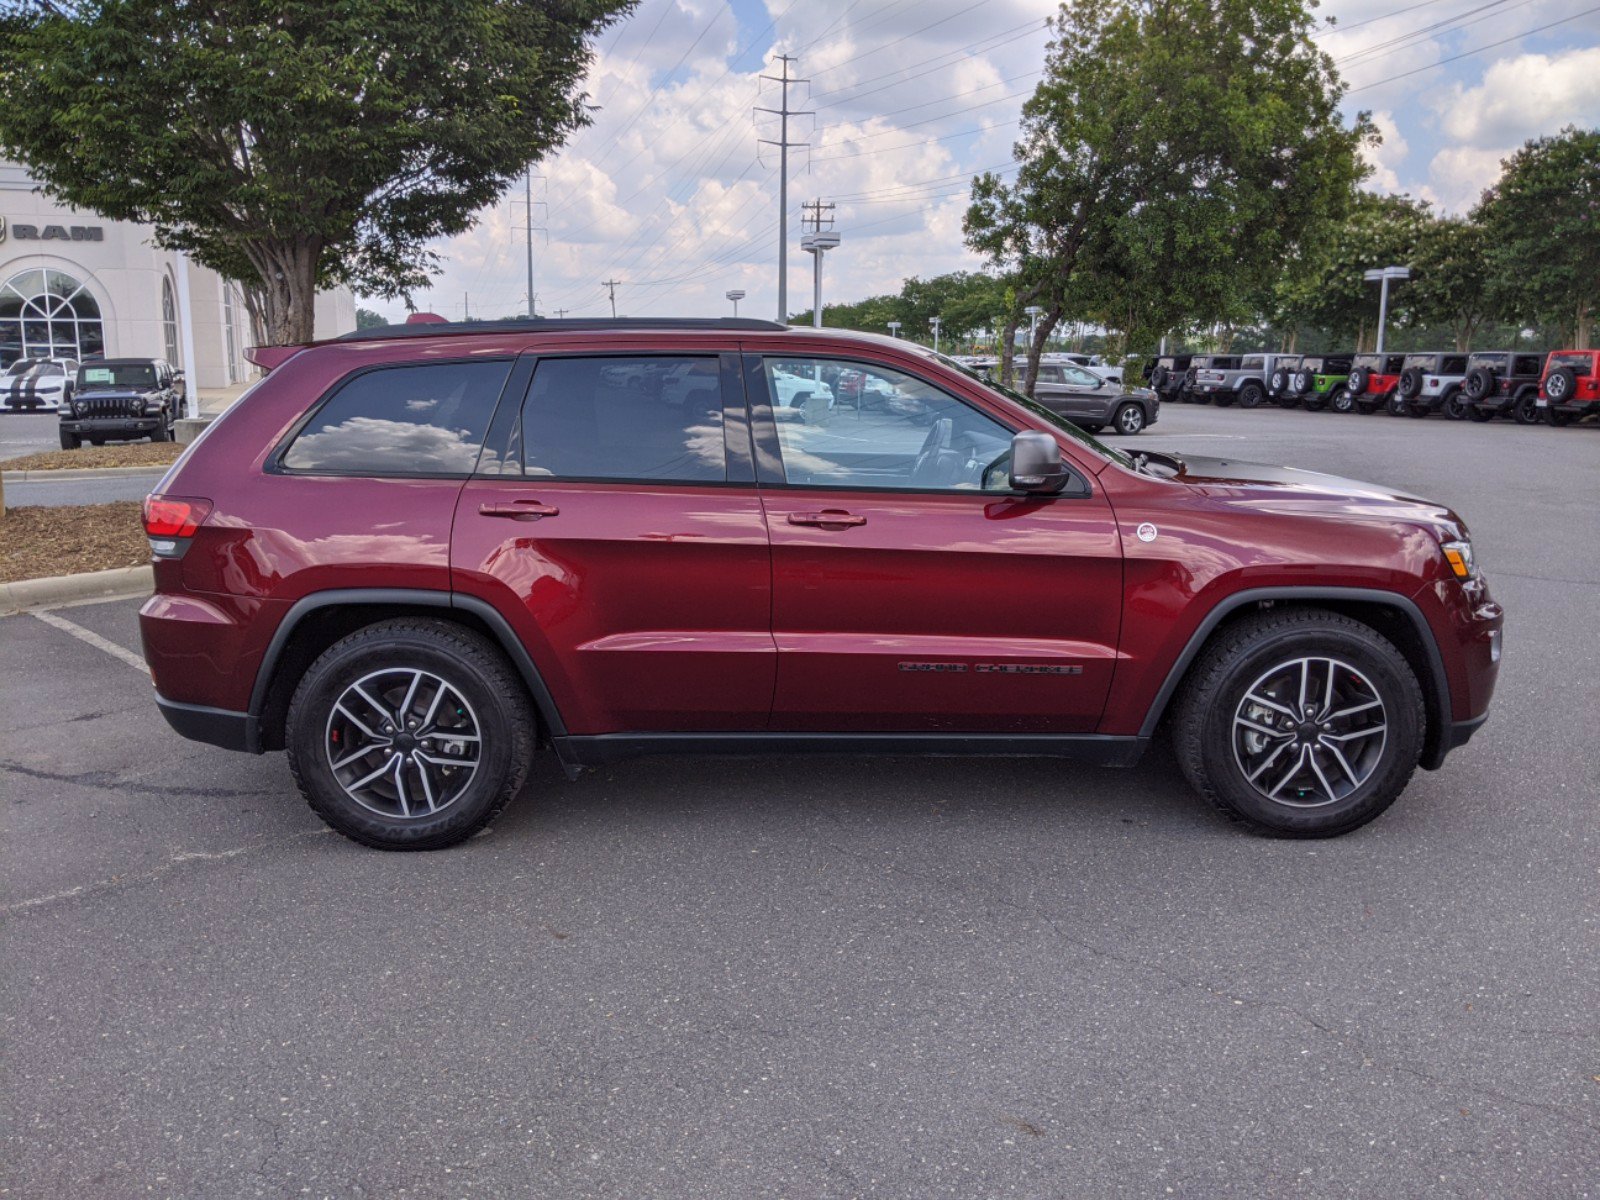 PreOwned 2020 Jeep Grand Cherokee Trailhawk With